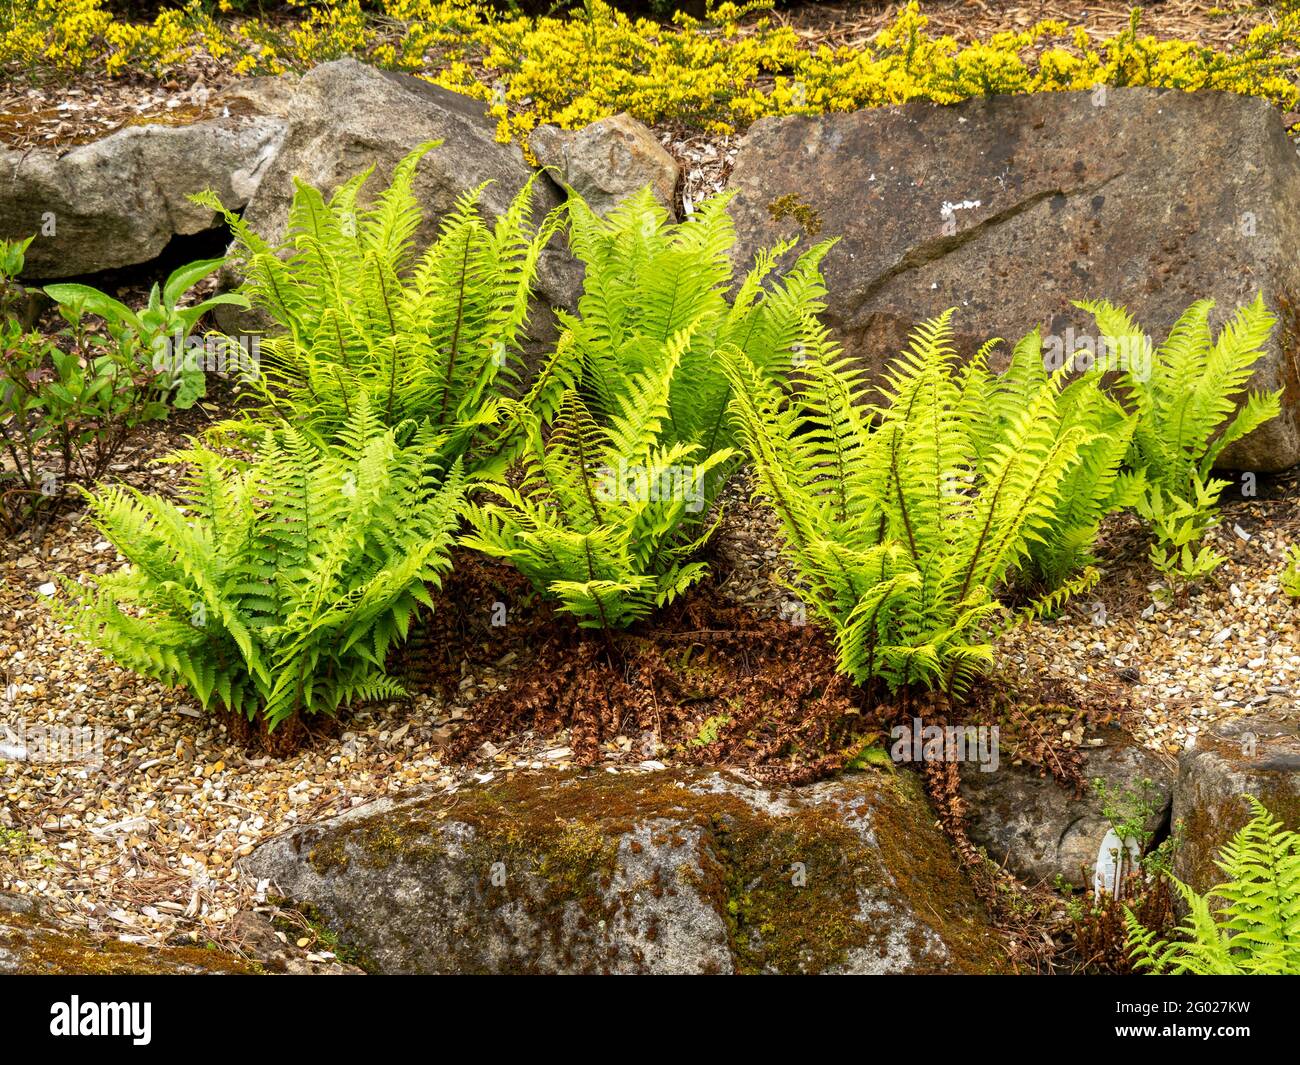 Young ferns growing in a rock garden Stock Photo